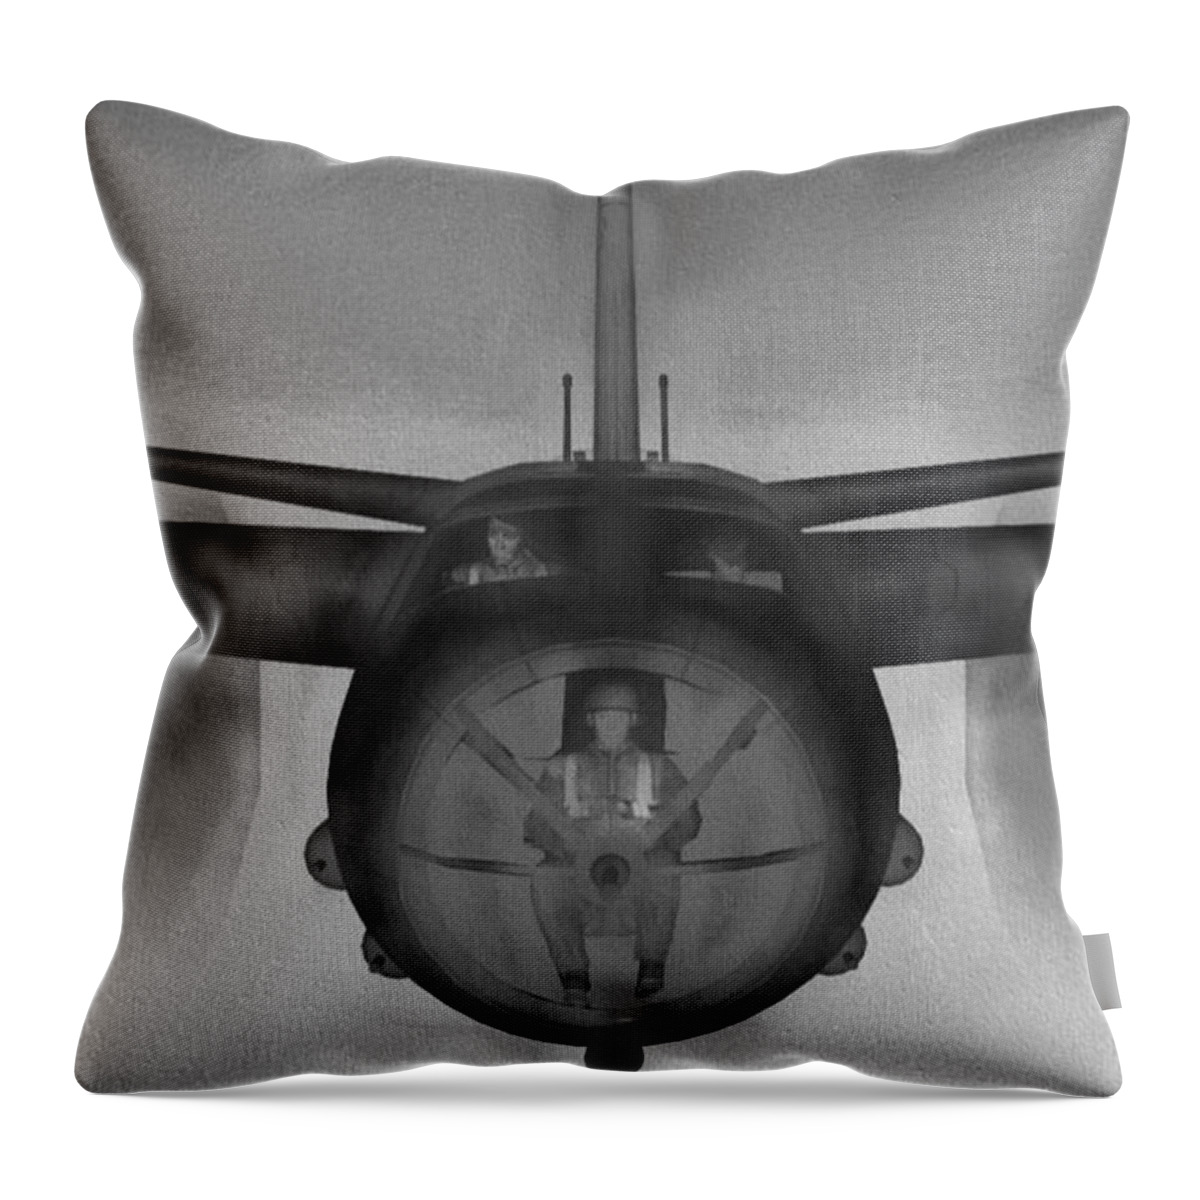 Martin B-26 Marauder Throw Pillow featuring the digital art B-26 Triptych No 3 #3 by Tommy Anderson